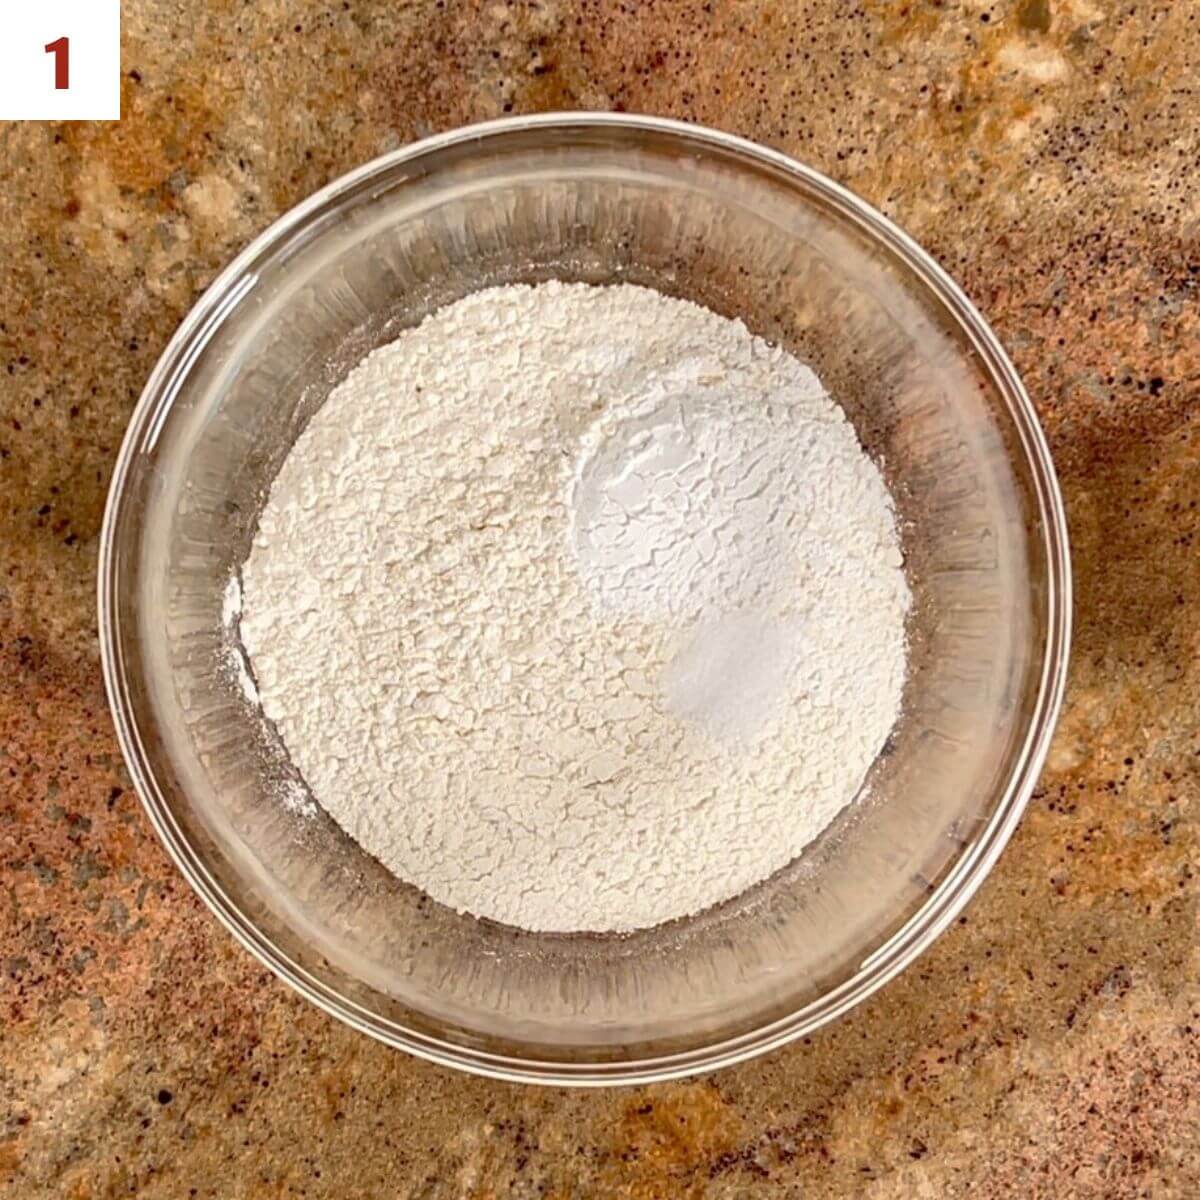 Flour, baking powder, and salt in a glass bowl from overhead.